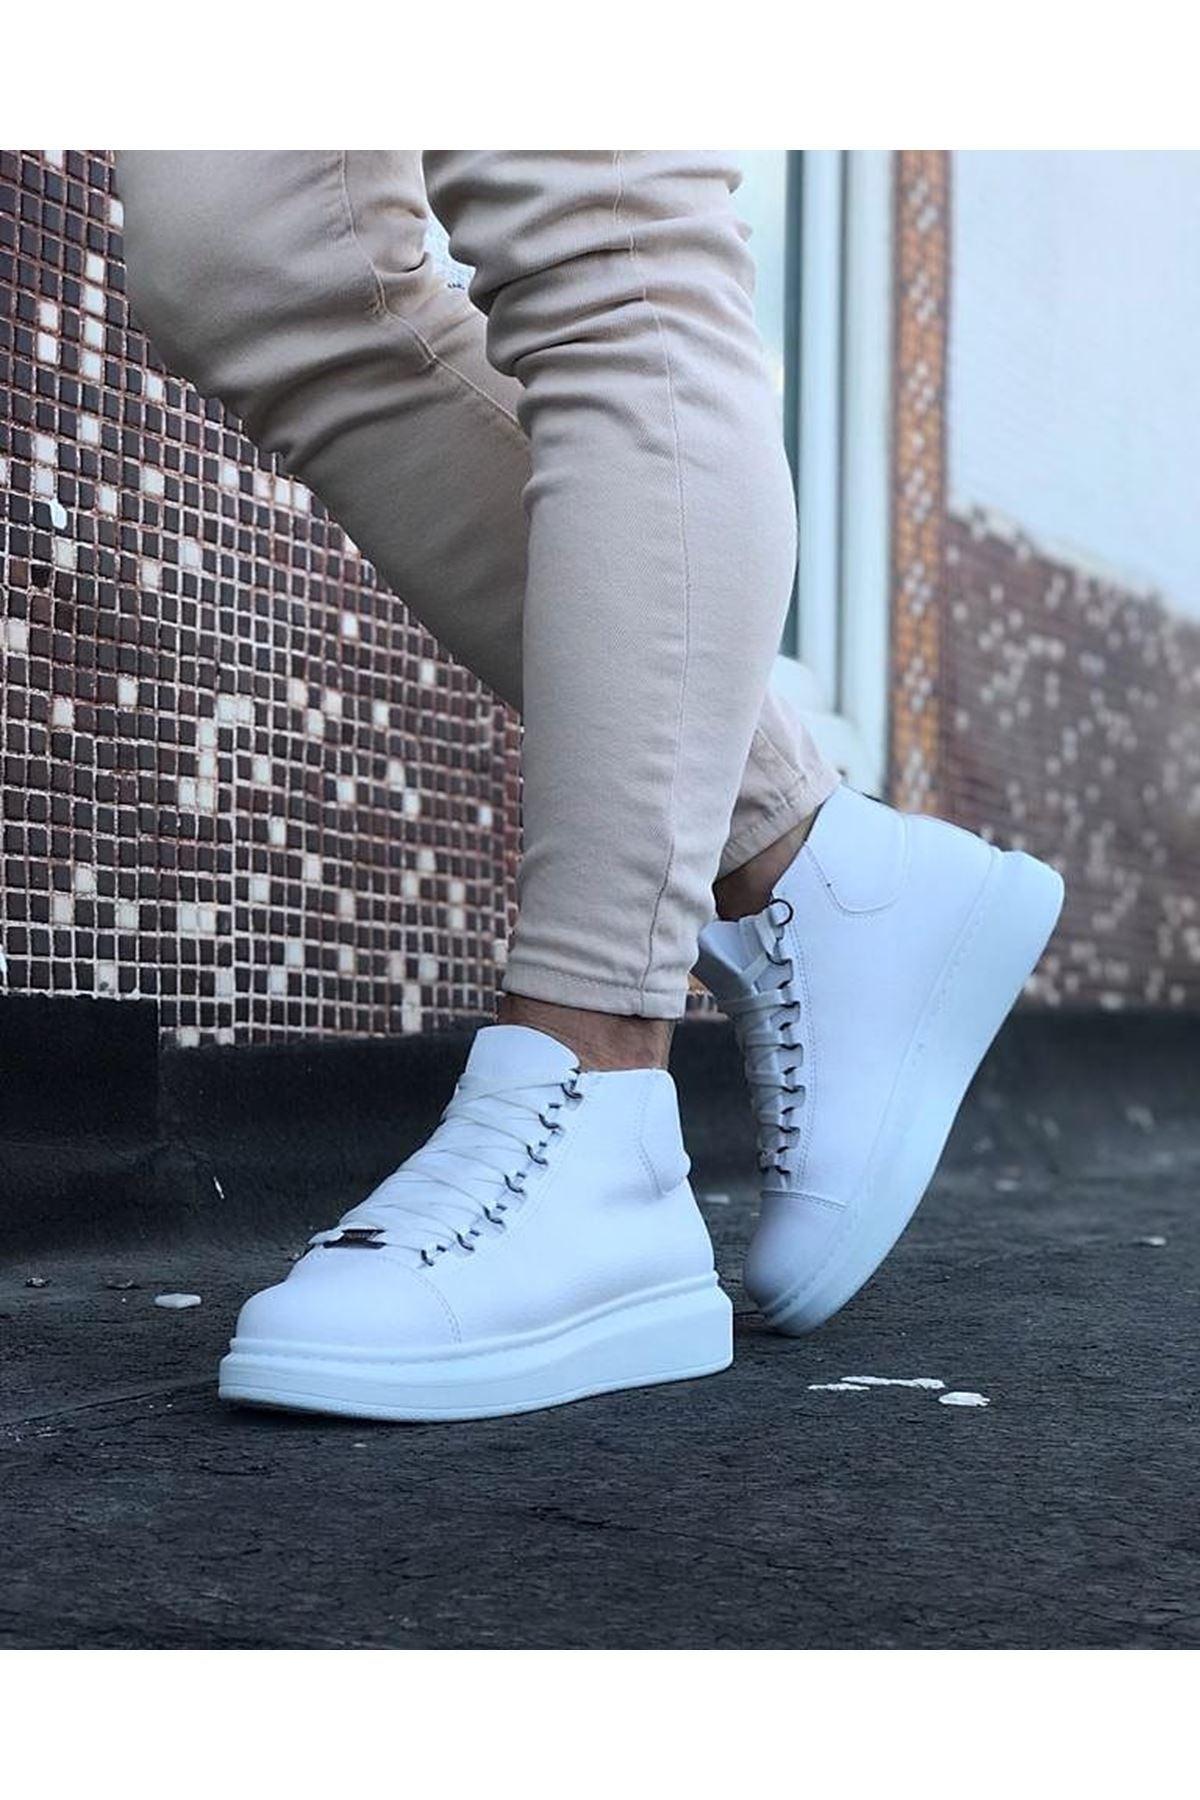 WG032 White Lace-up Sneakers Half Ankle Boots - STREET MODE ™